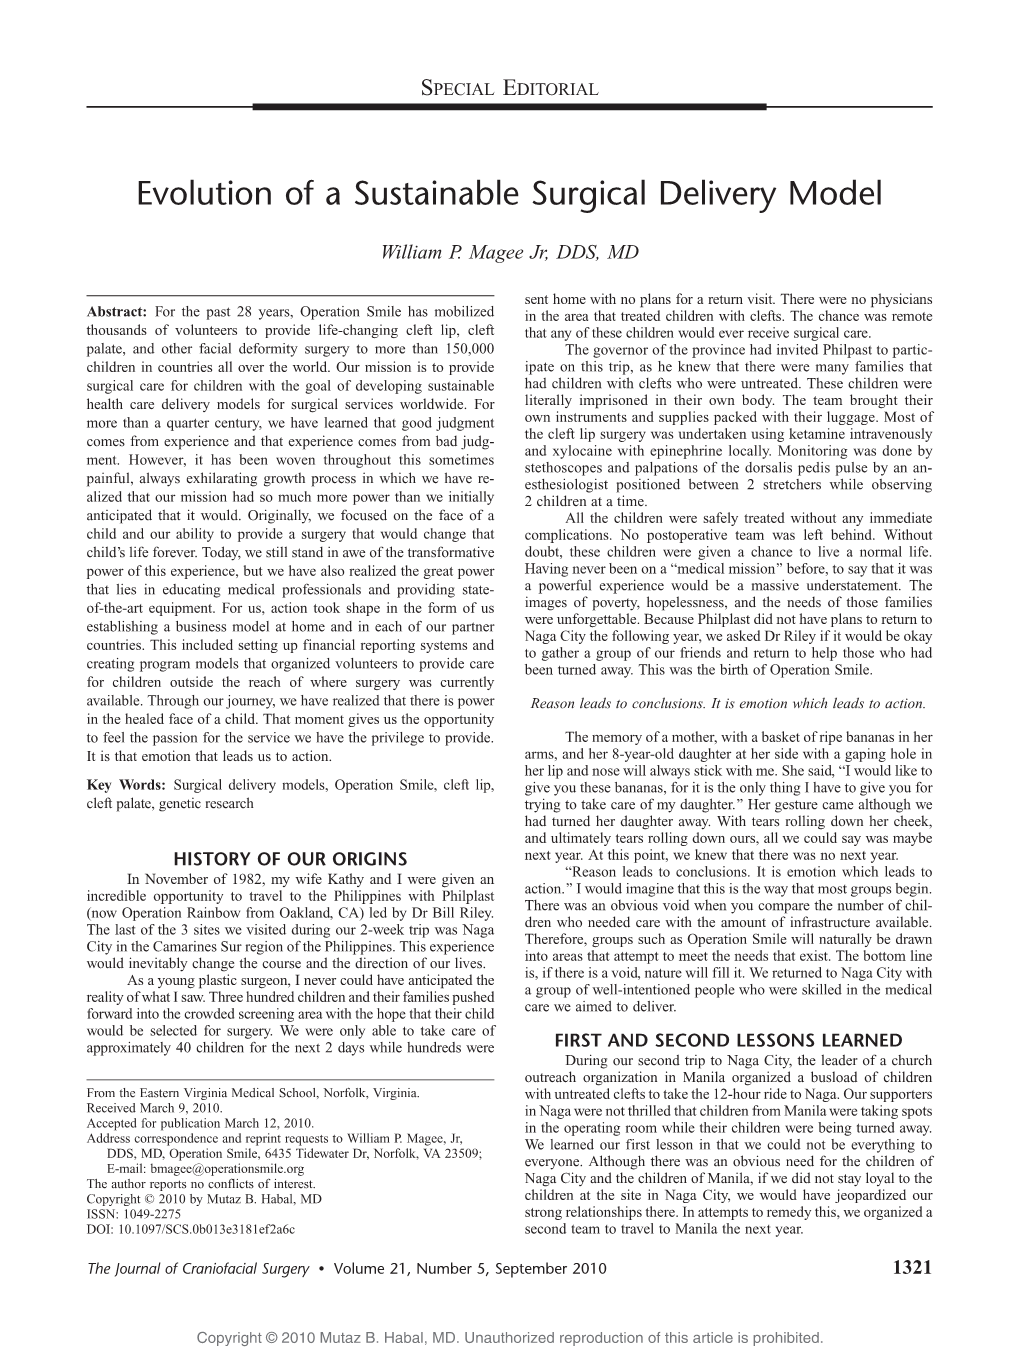 Evolution of a Sustainable Surgical Delivery Model